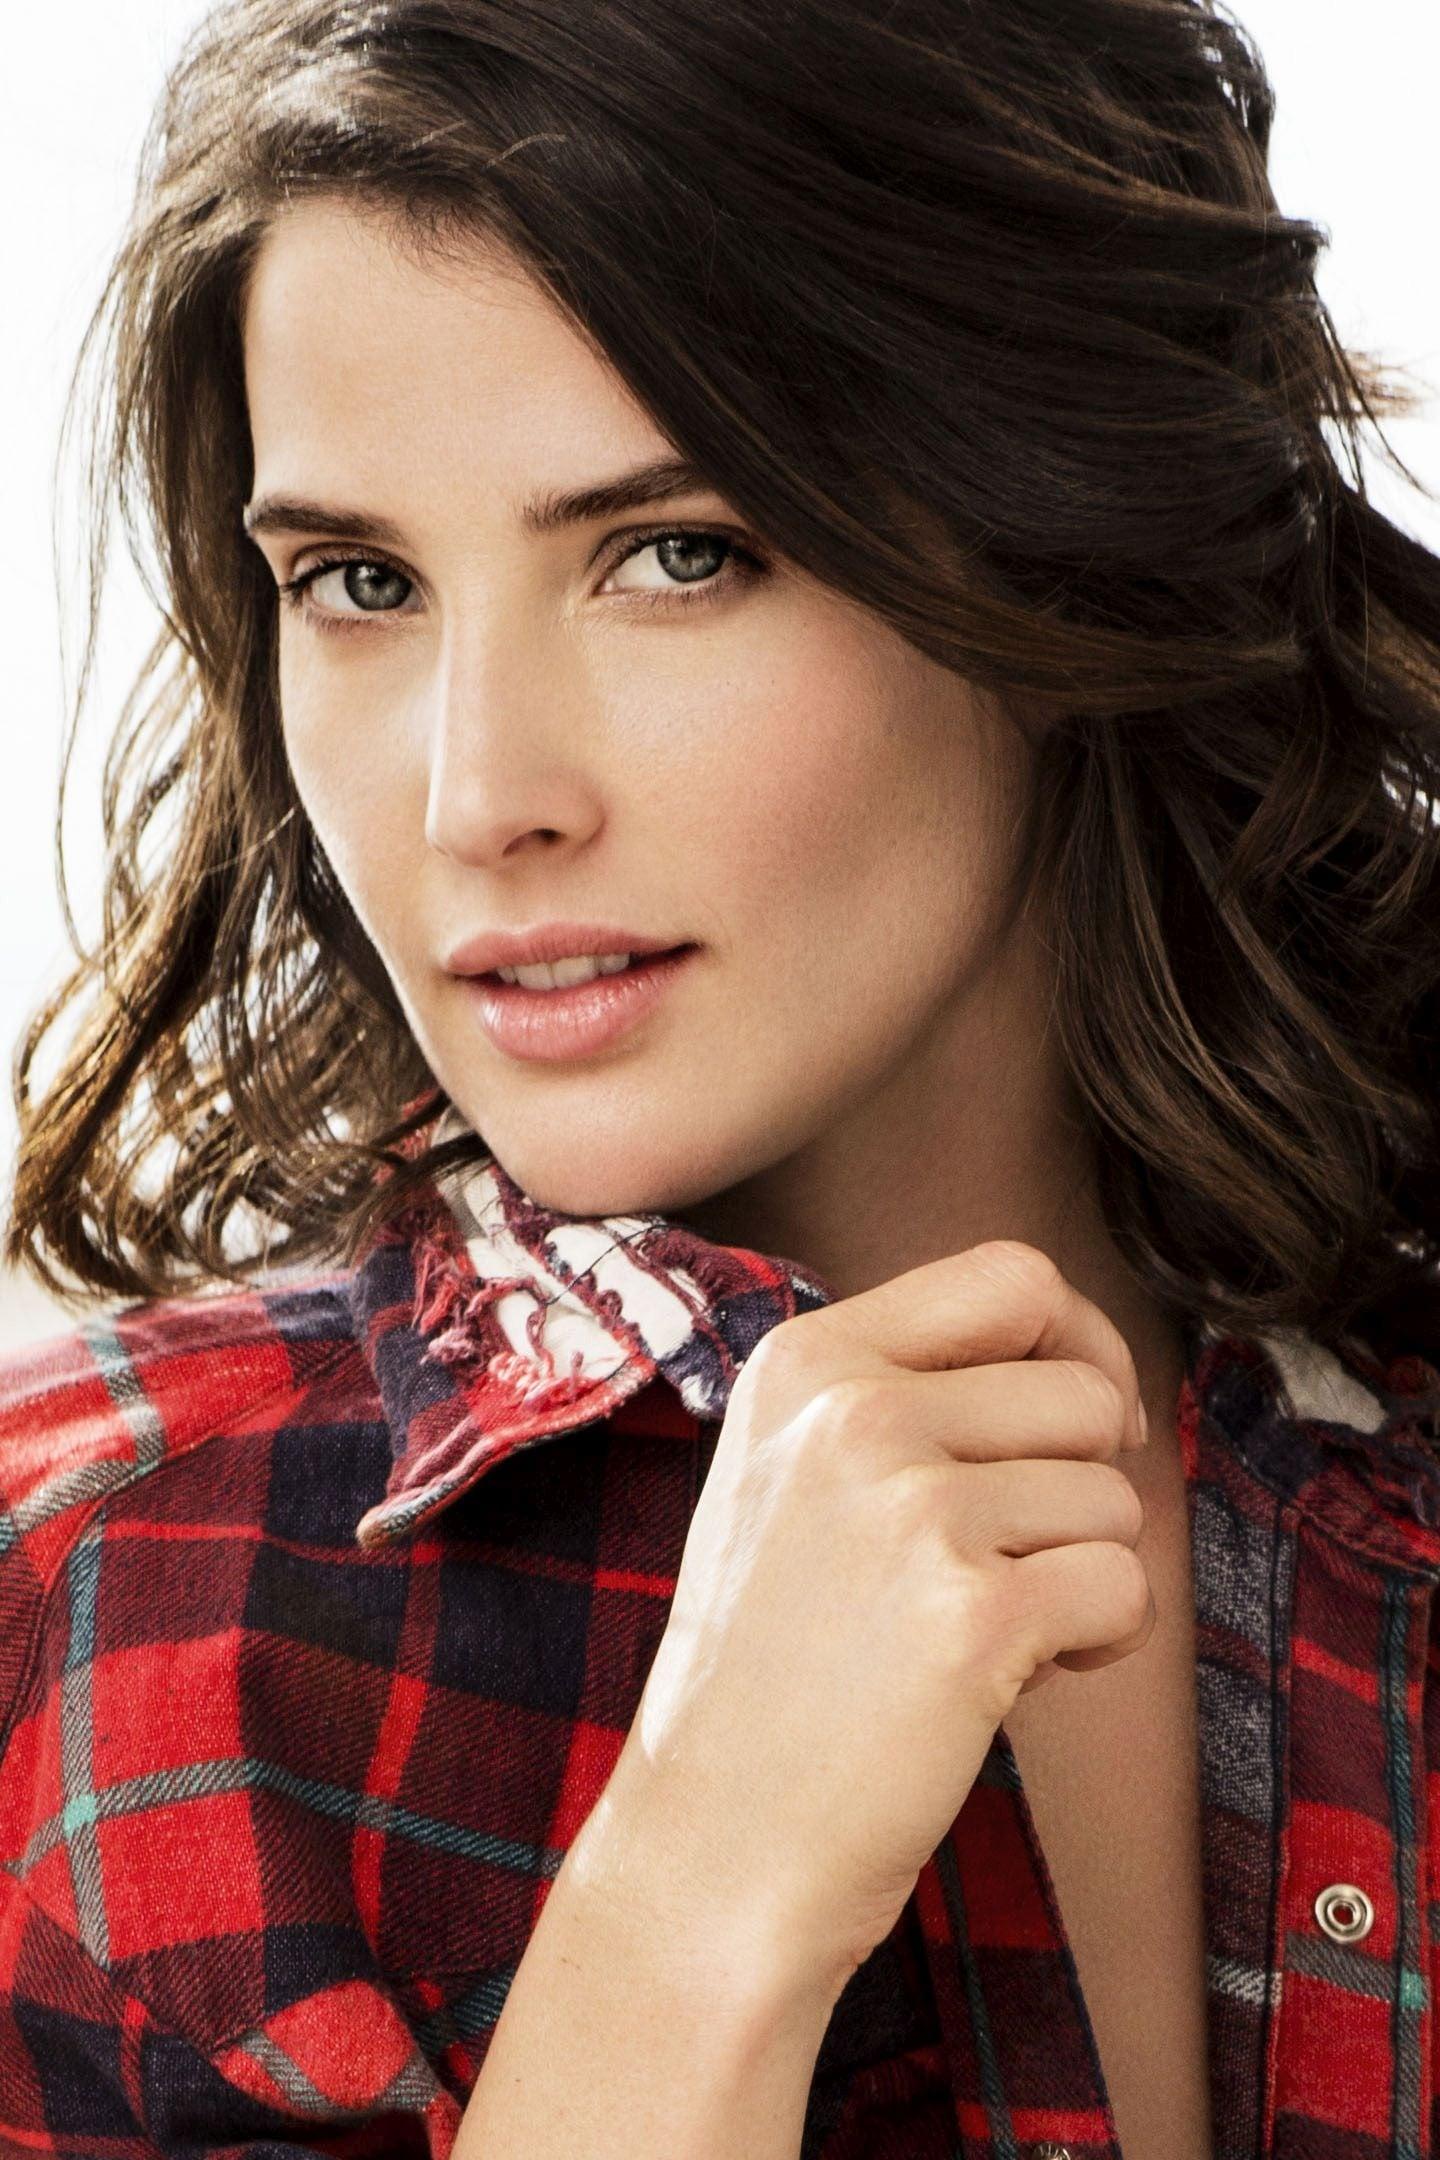 70+ Hot Pictures Of Cobie Smulders – Maria Hill Actress In Marvel Movies 60